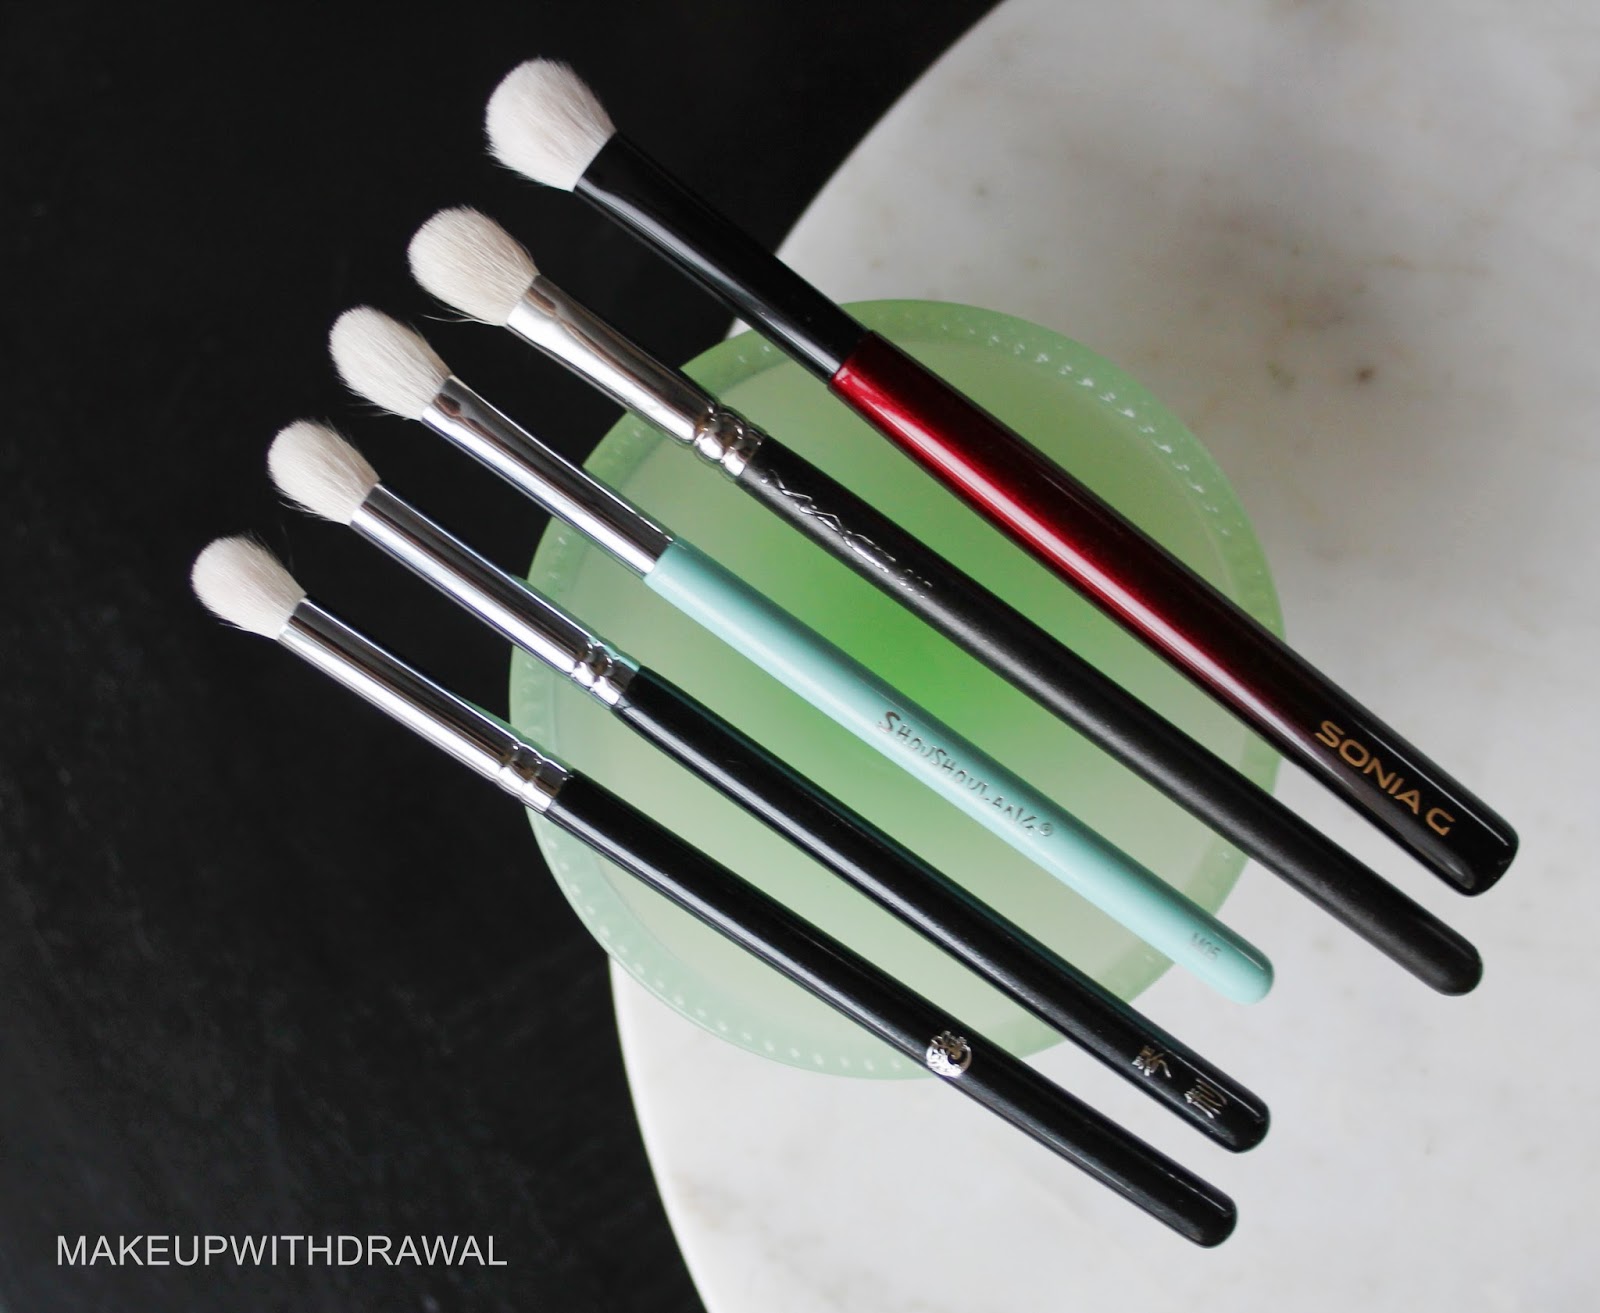 Sonia G Worker Two and Pencil Two Brushes | Makeup Withdrawal